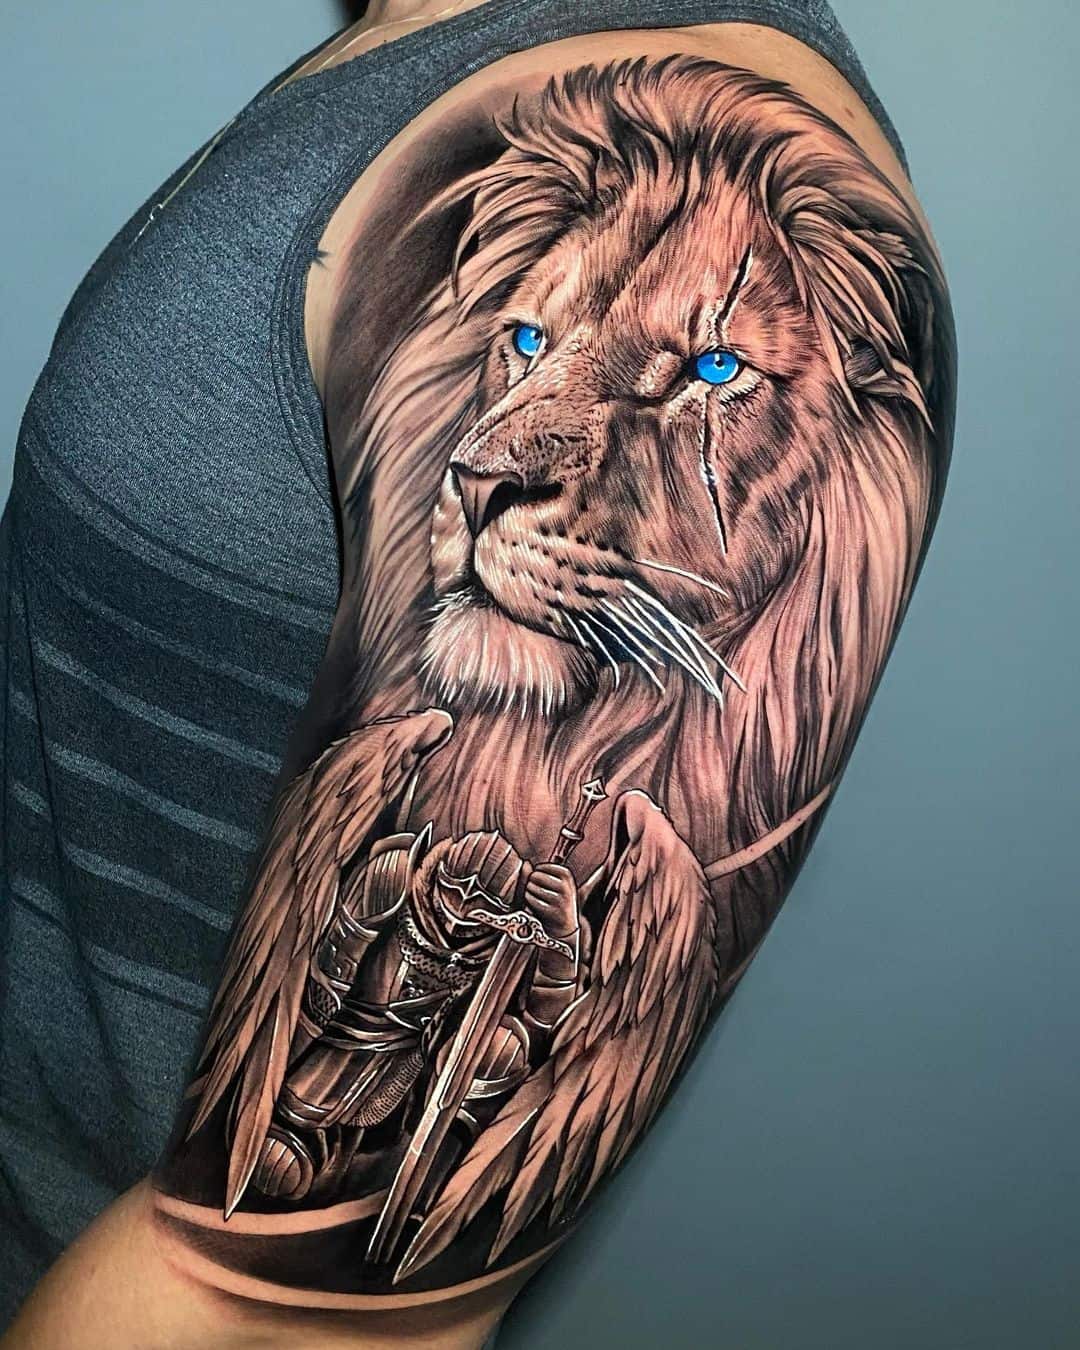 Wild And Rugged: Top Animal Tattoo Designs For Men